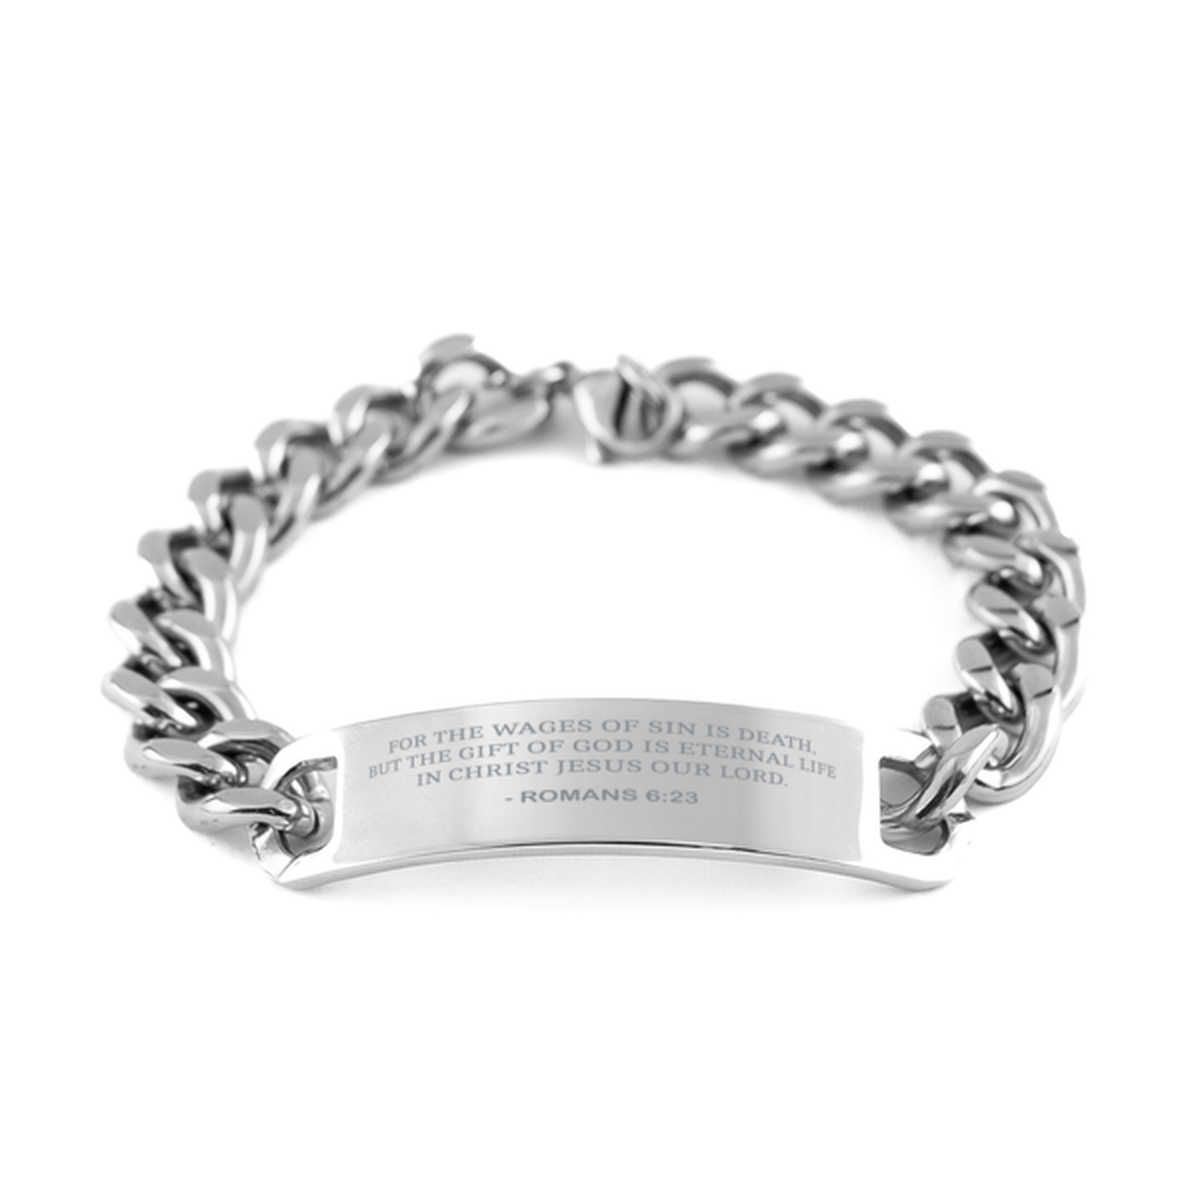 Bible Verse Chain Stainless Steel Bracelet, Romans 6:23 For The Wages Of Sin Is Death, But The Gift Of, Inspirational Christian Gifts For Men Women